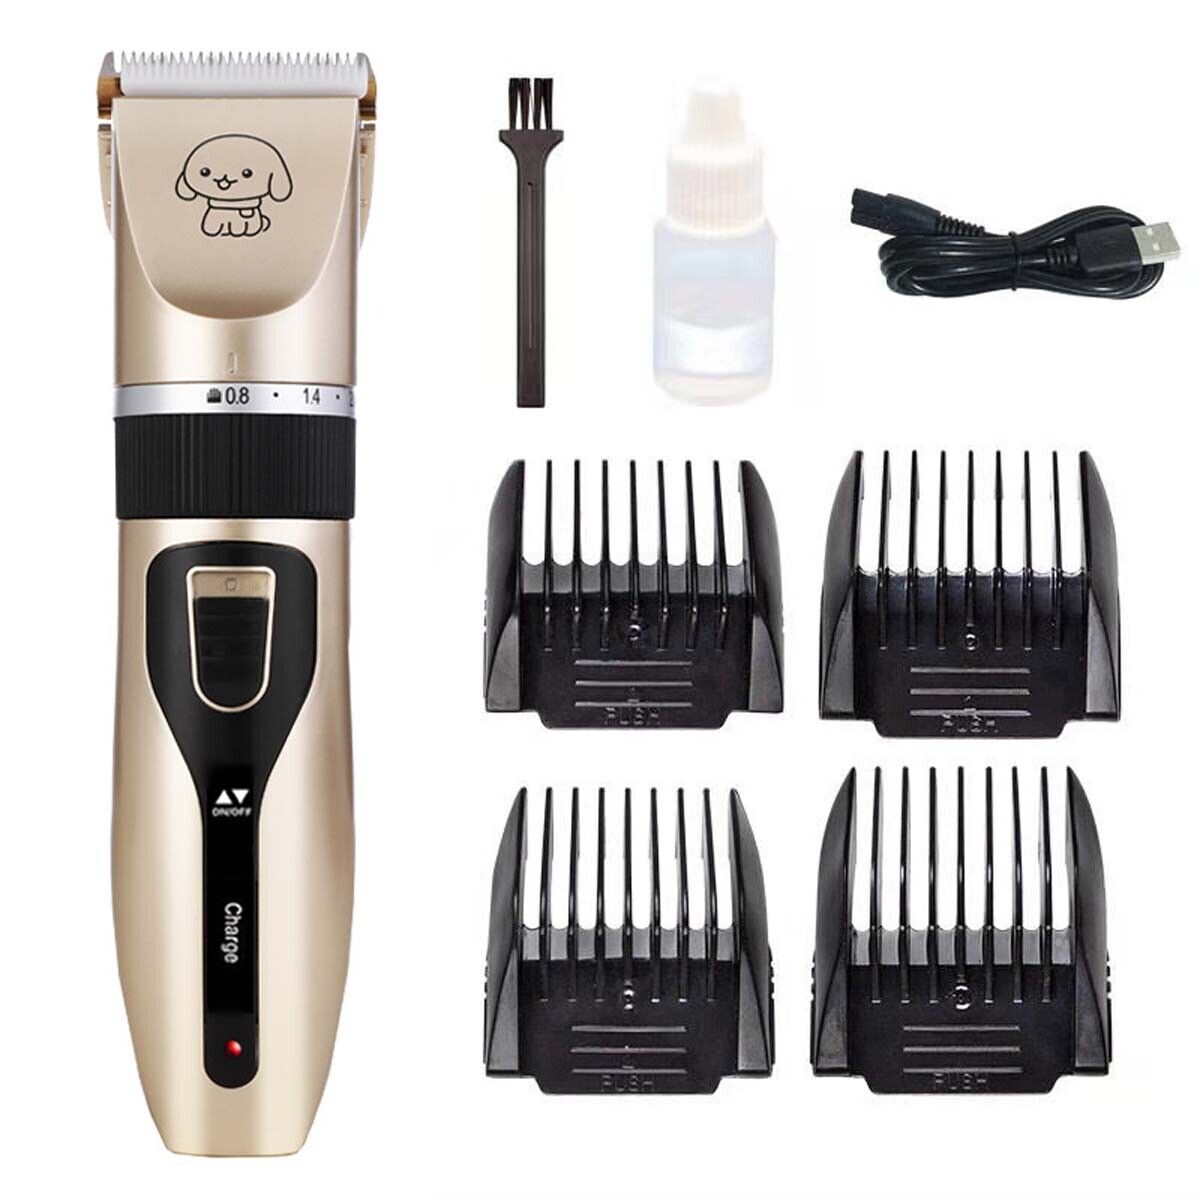 Dog Cat Pet Grooming Kit Rechargeable Cordless Electric Hair Clipper Trimmer Kit